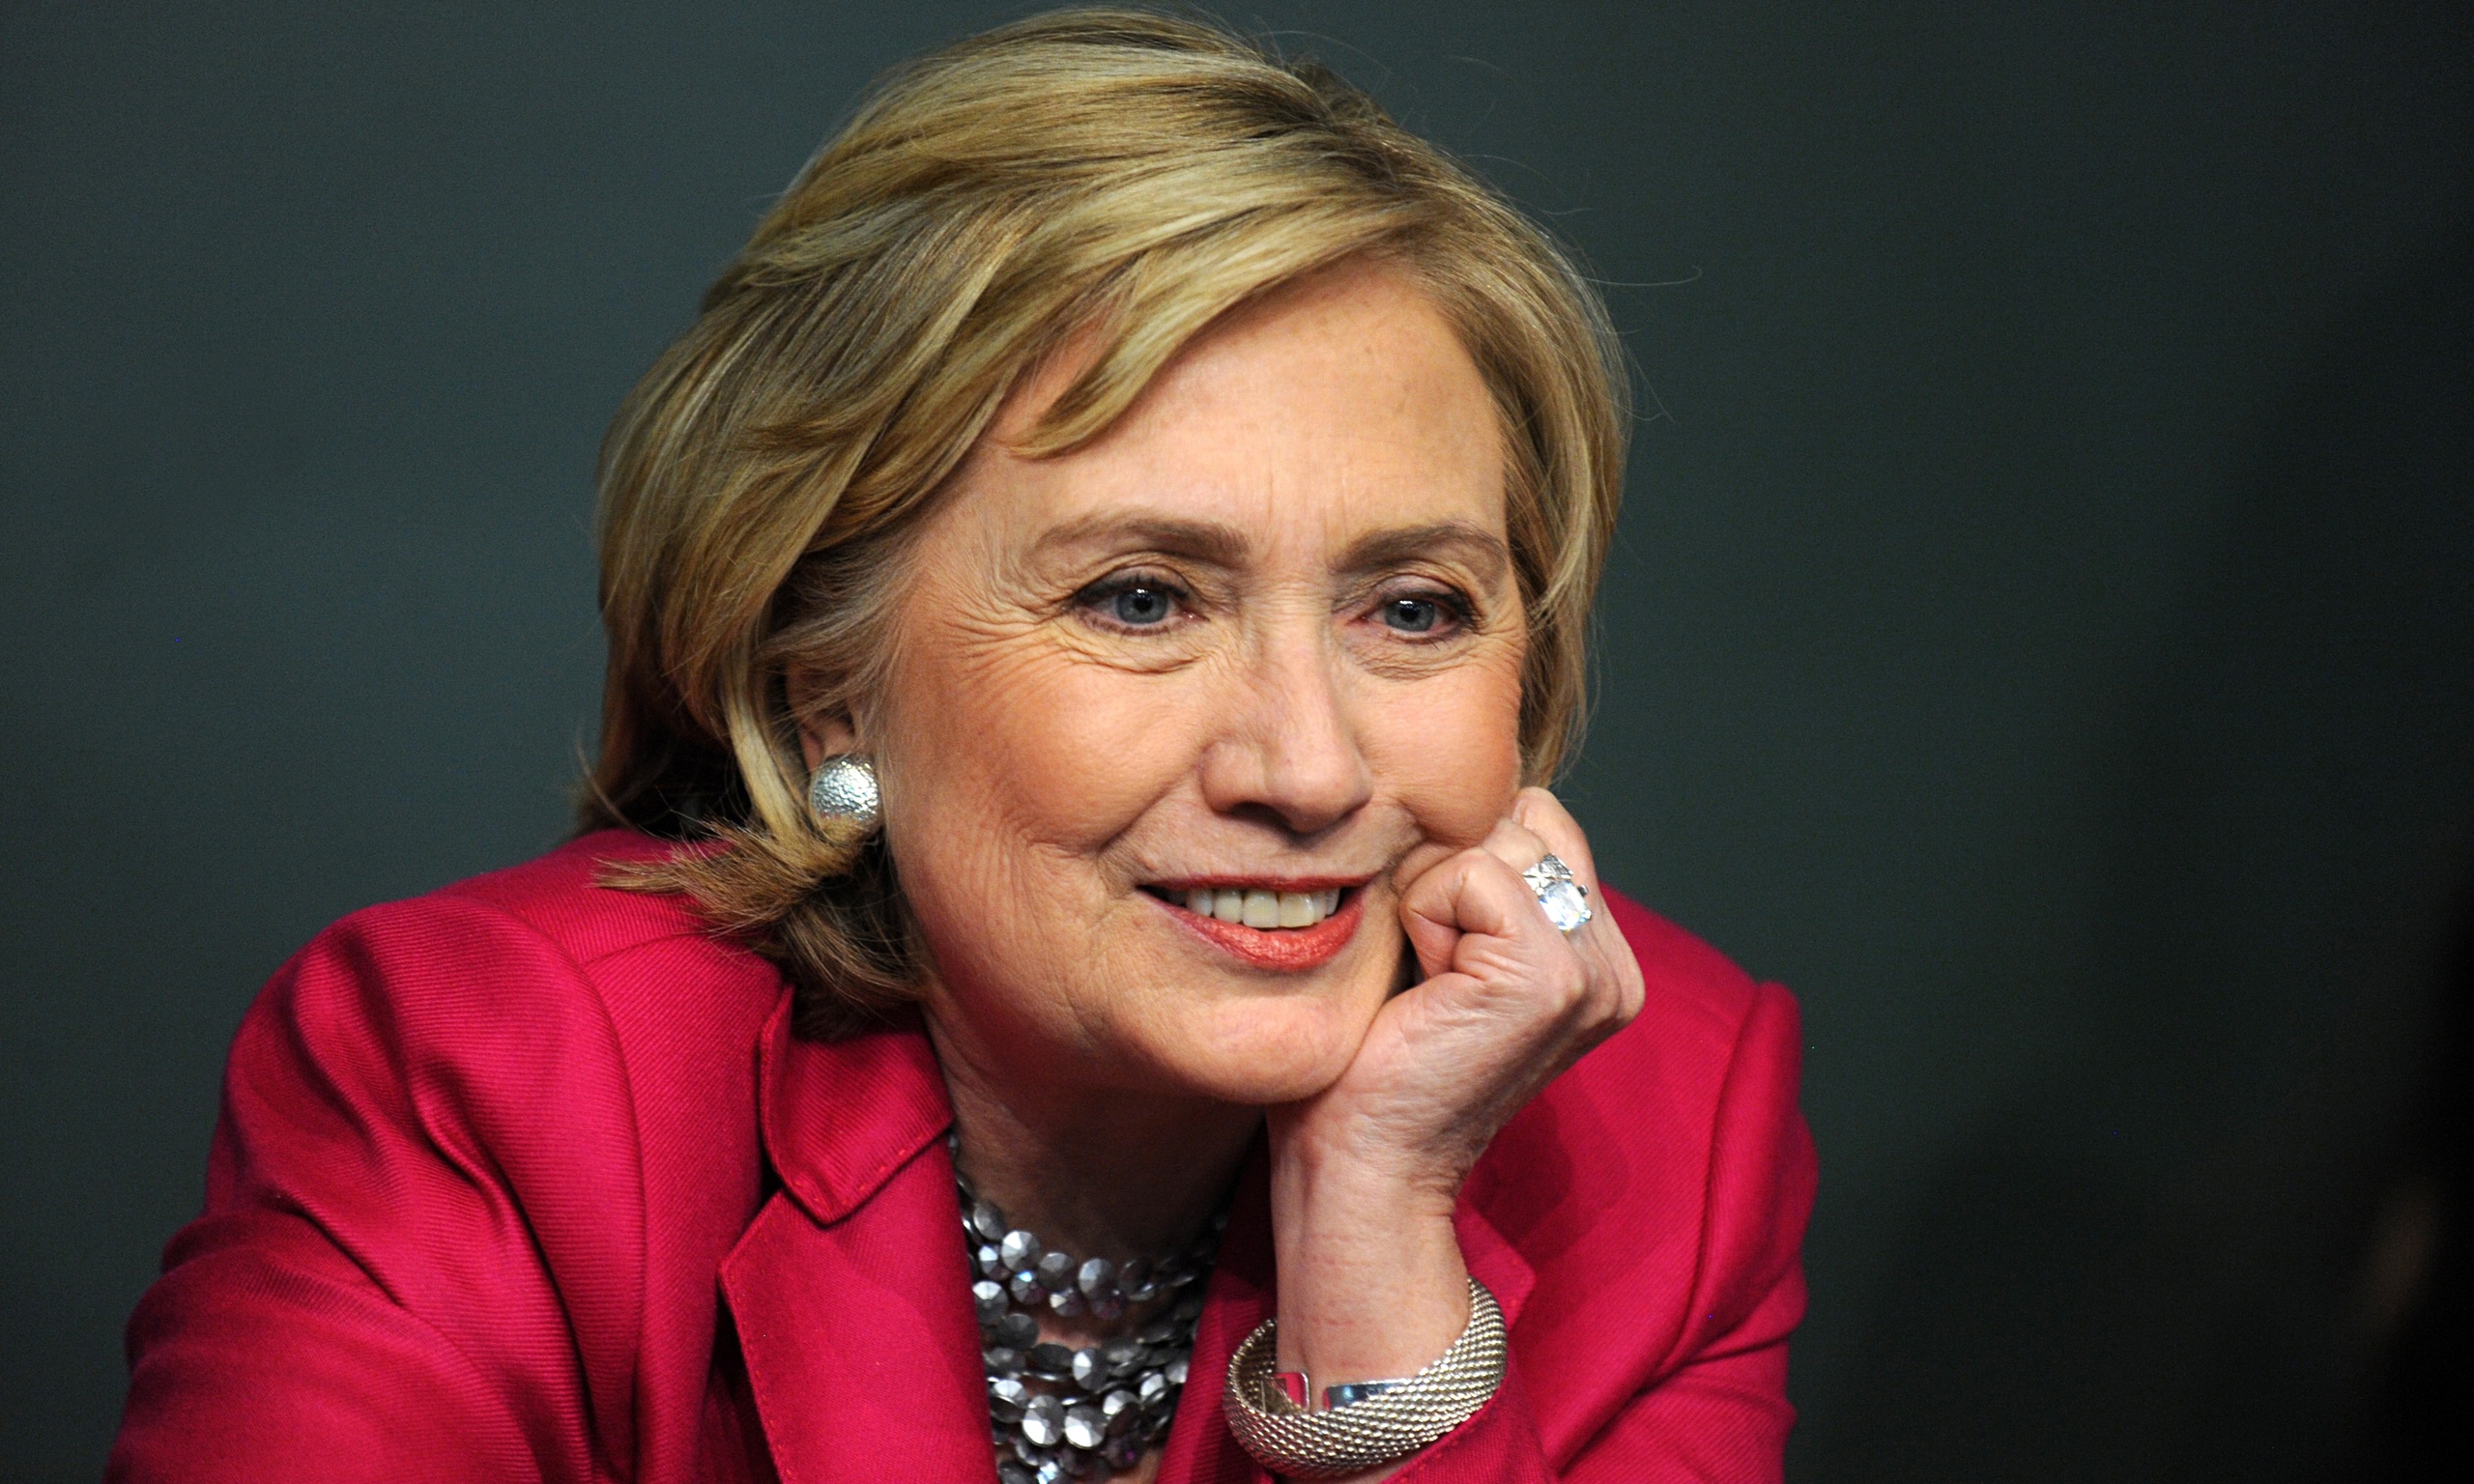 Hillary Clinton Agrees to ABC News’ Good Morning America Debate: ‘I’ll Be There’